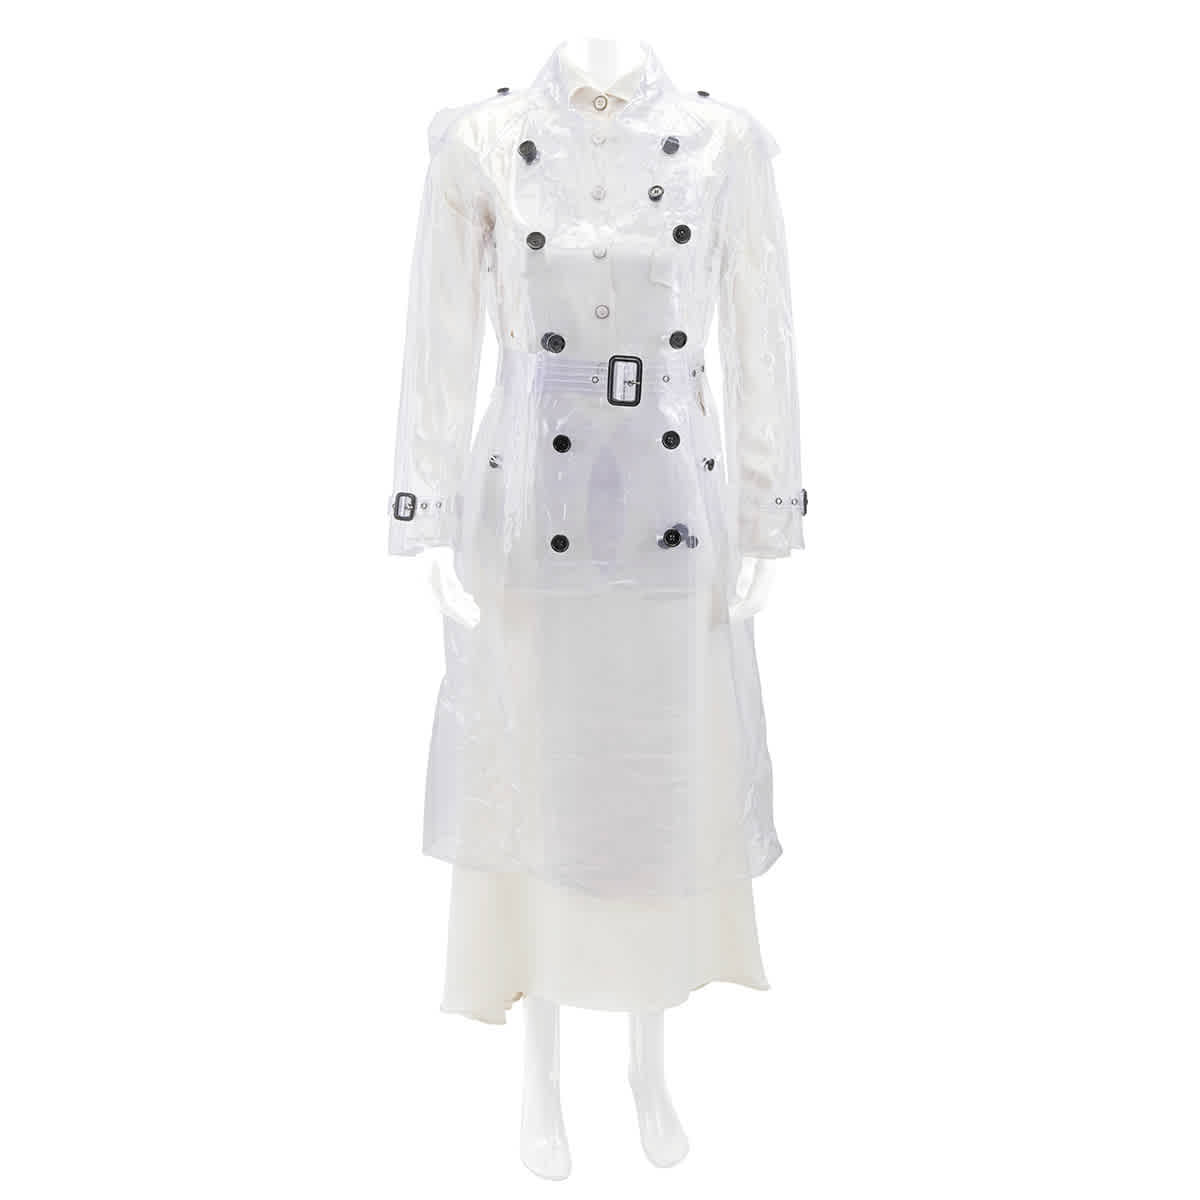 clear plastic trench coat,Save up to 17%,www.ilcascinone.com